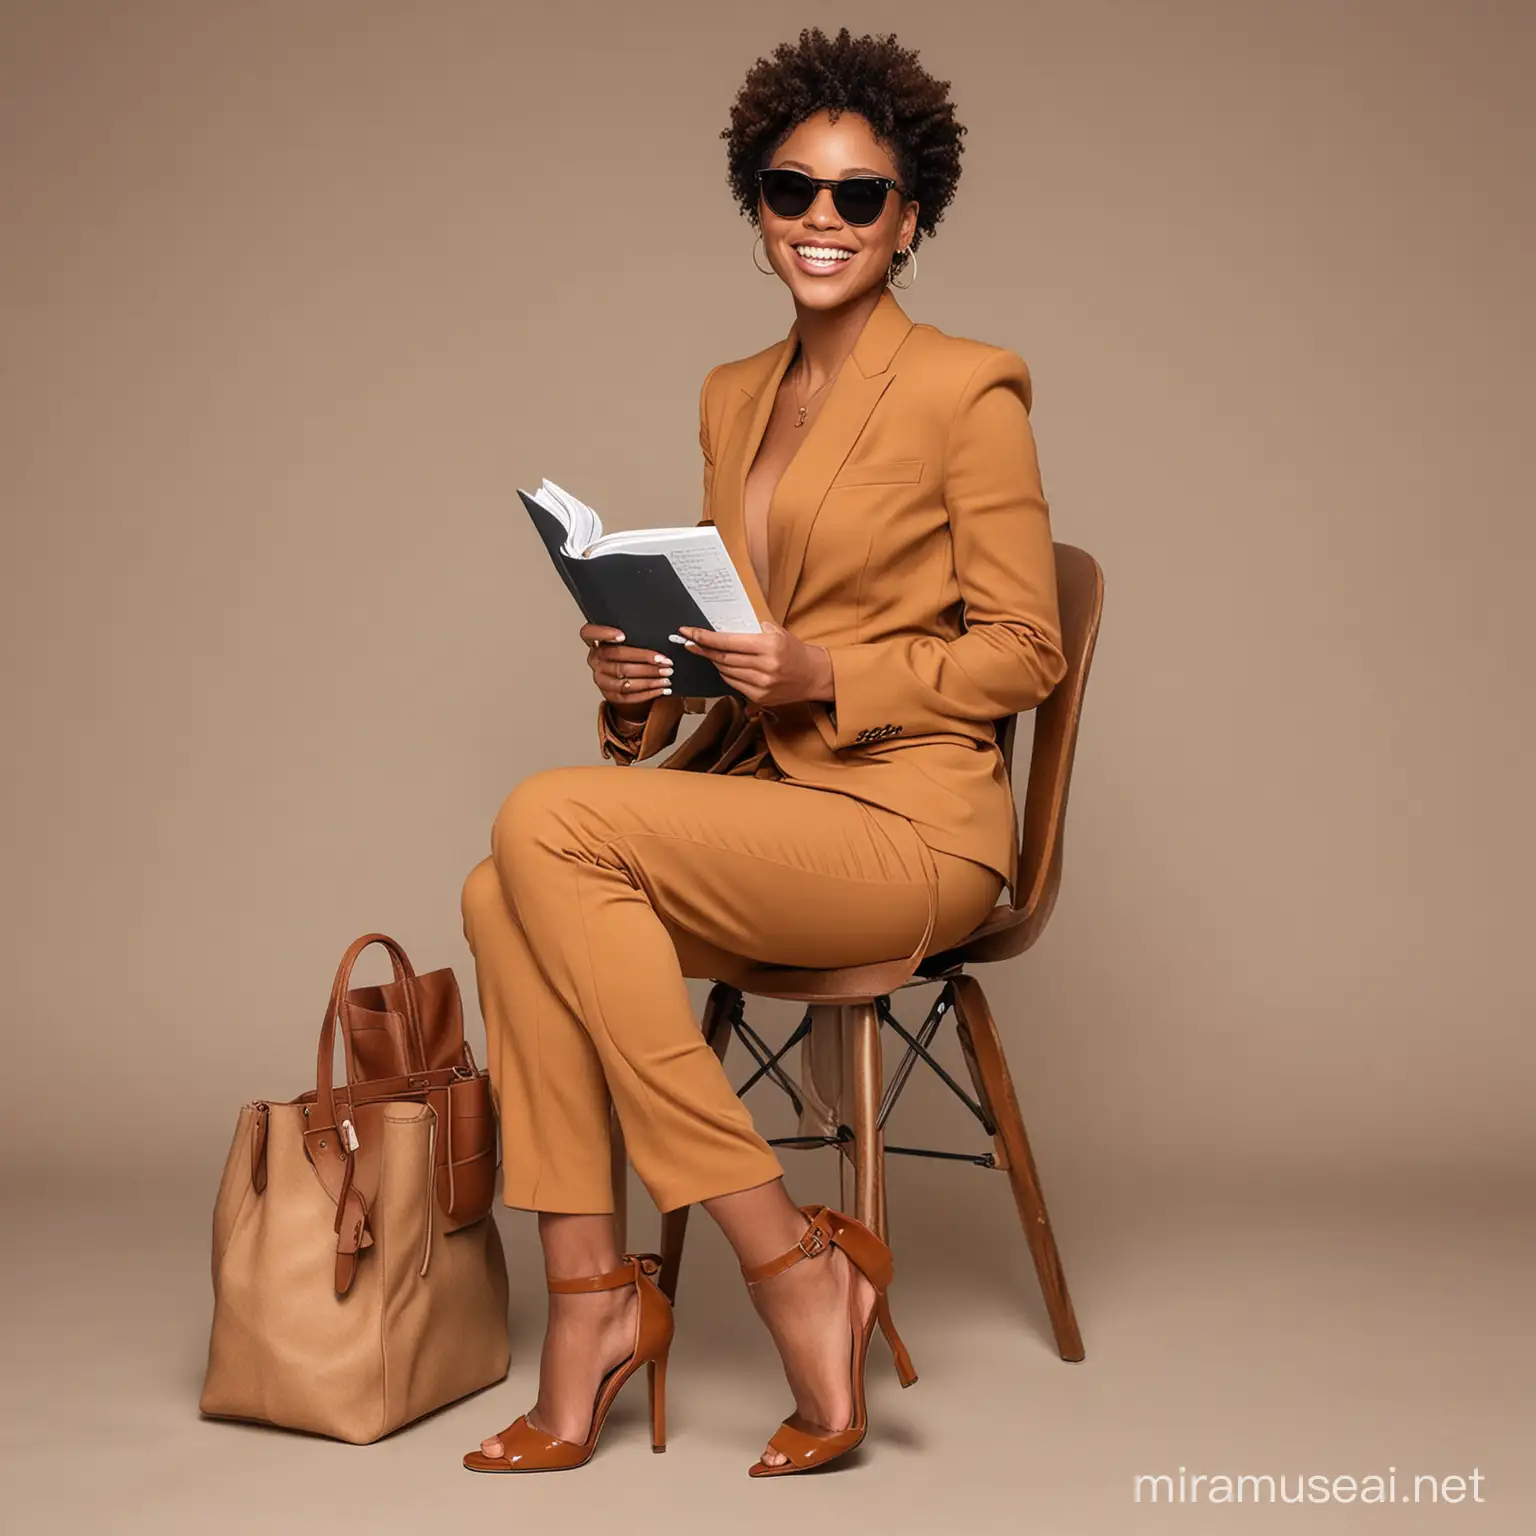 beautiful black woman with a brown suit, brown heels, sunglasses, holding a journal on with a pretty fashion purse, seated smiling, full body transparent background